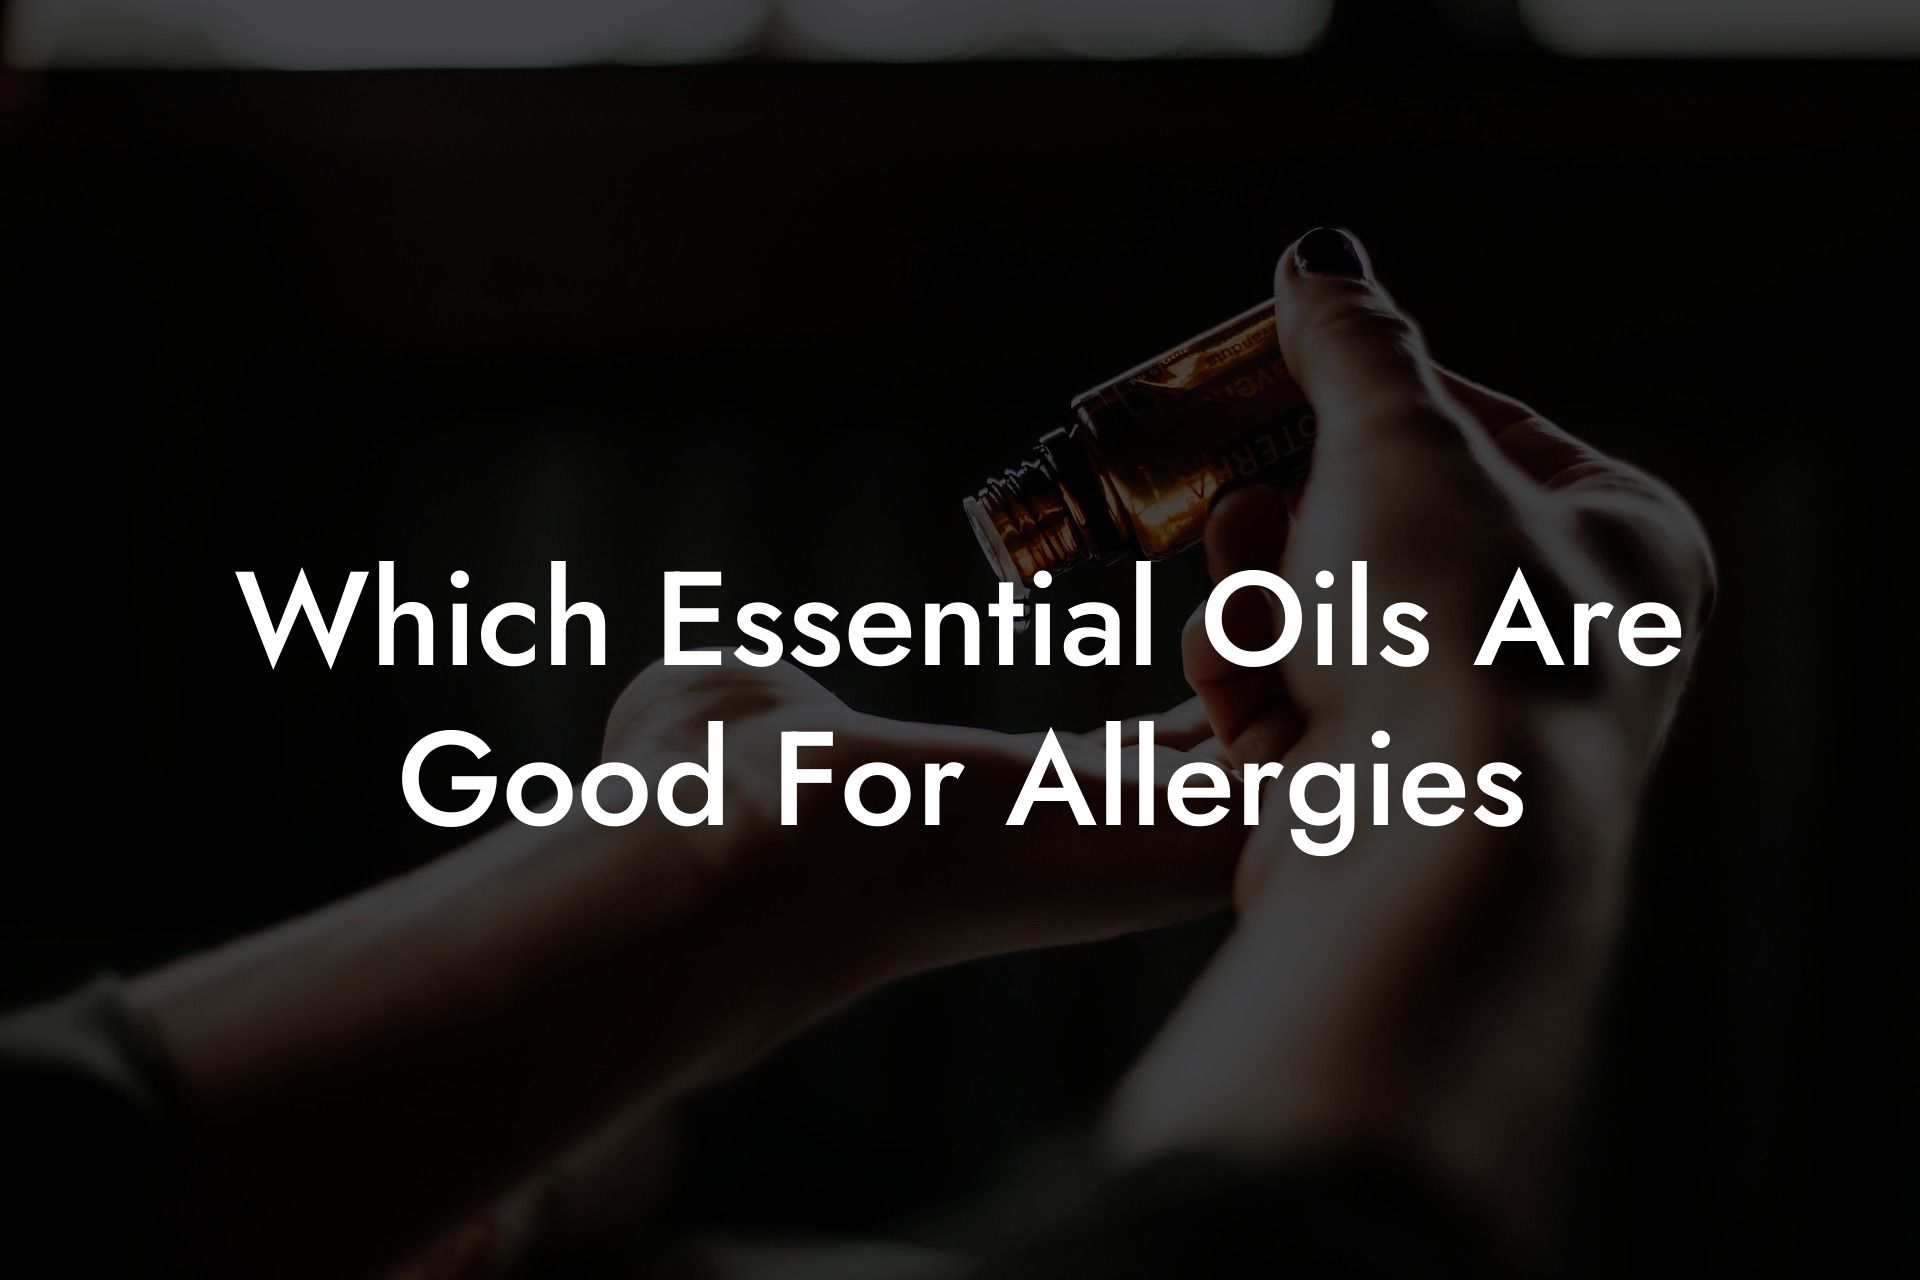 Which Essential Oils Are Good For Allergies